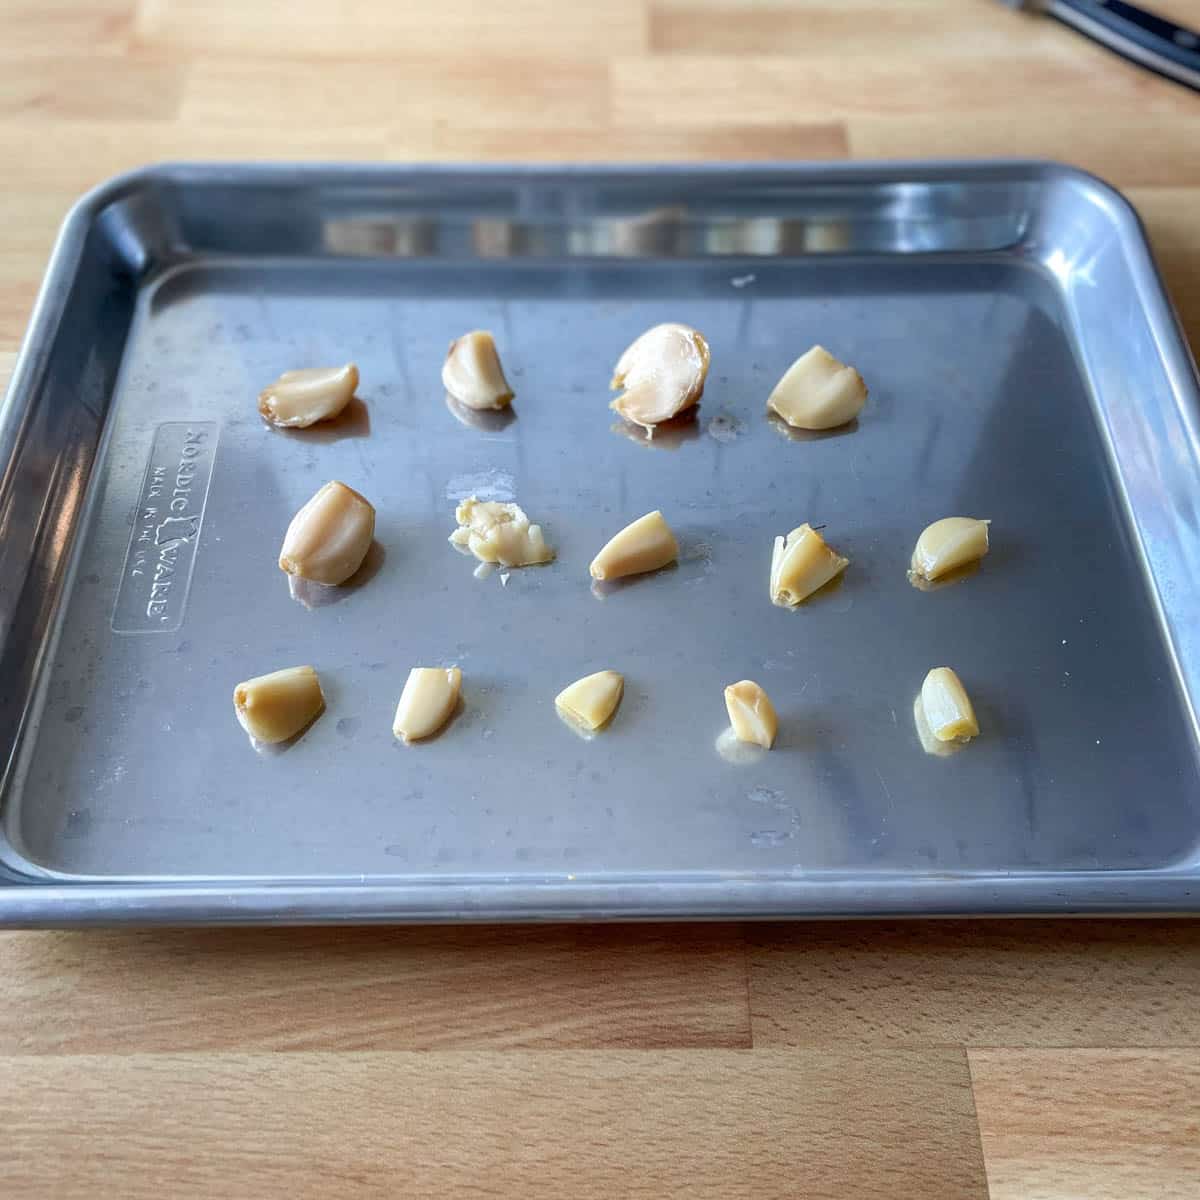 Peeled single cloves of garlic are shown in three lines on a small baking sheet.